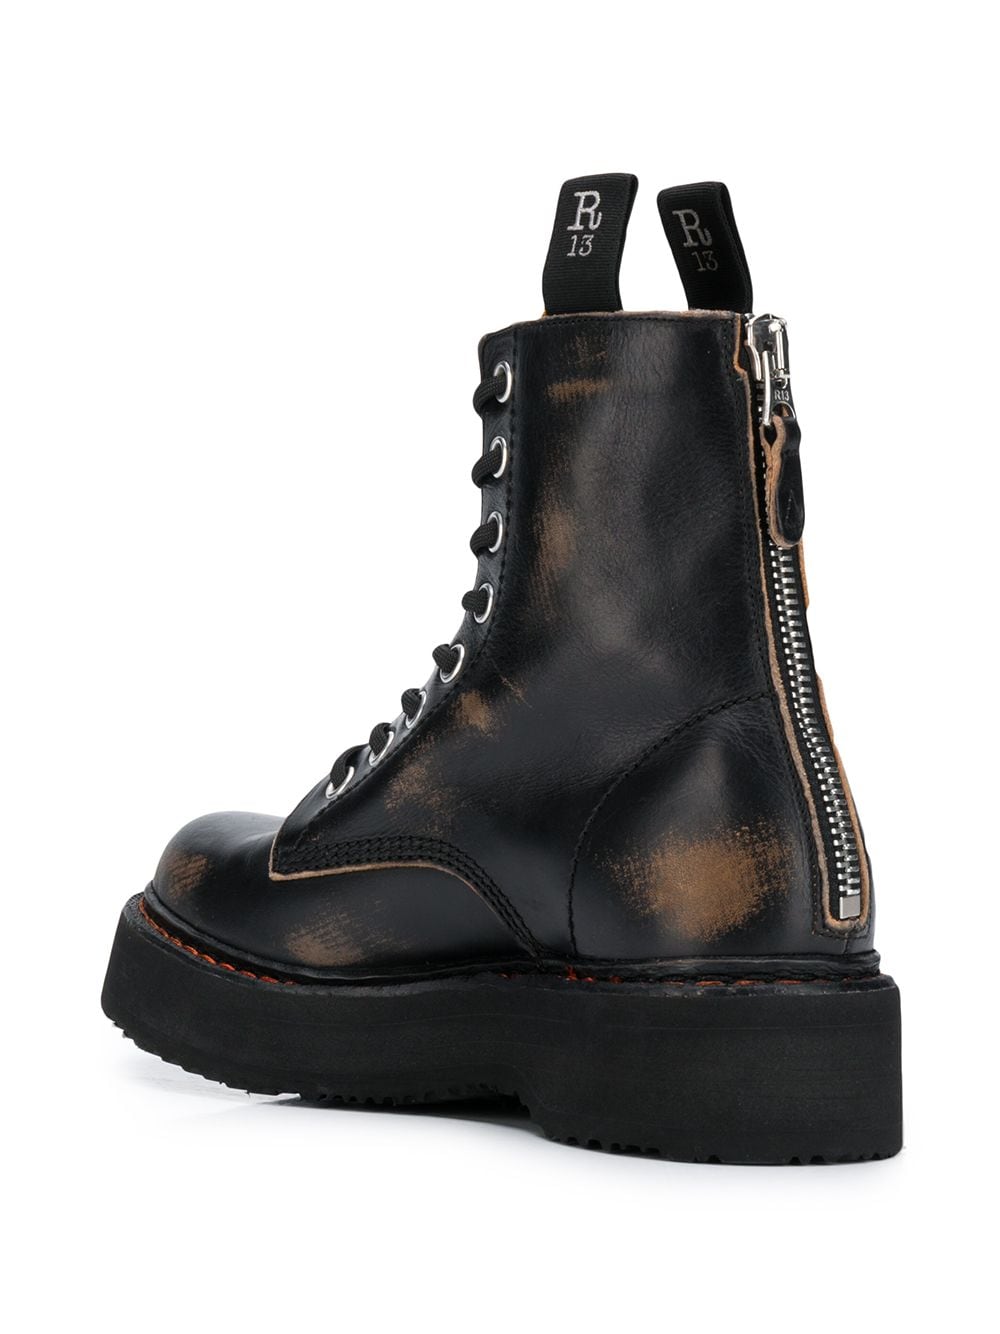 R13 Distressed lace-up Boots - Farfetch